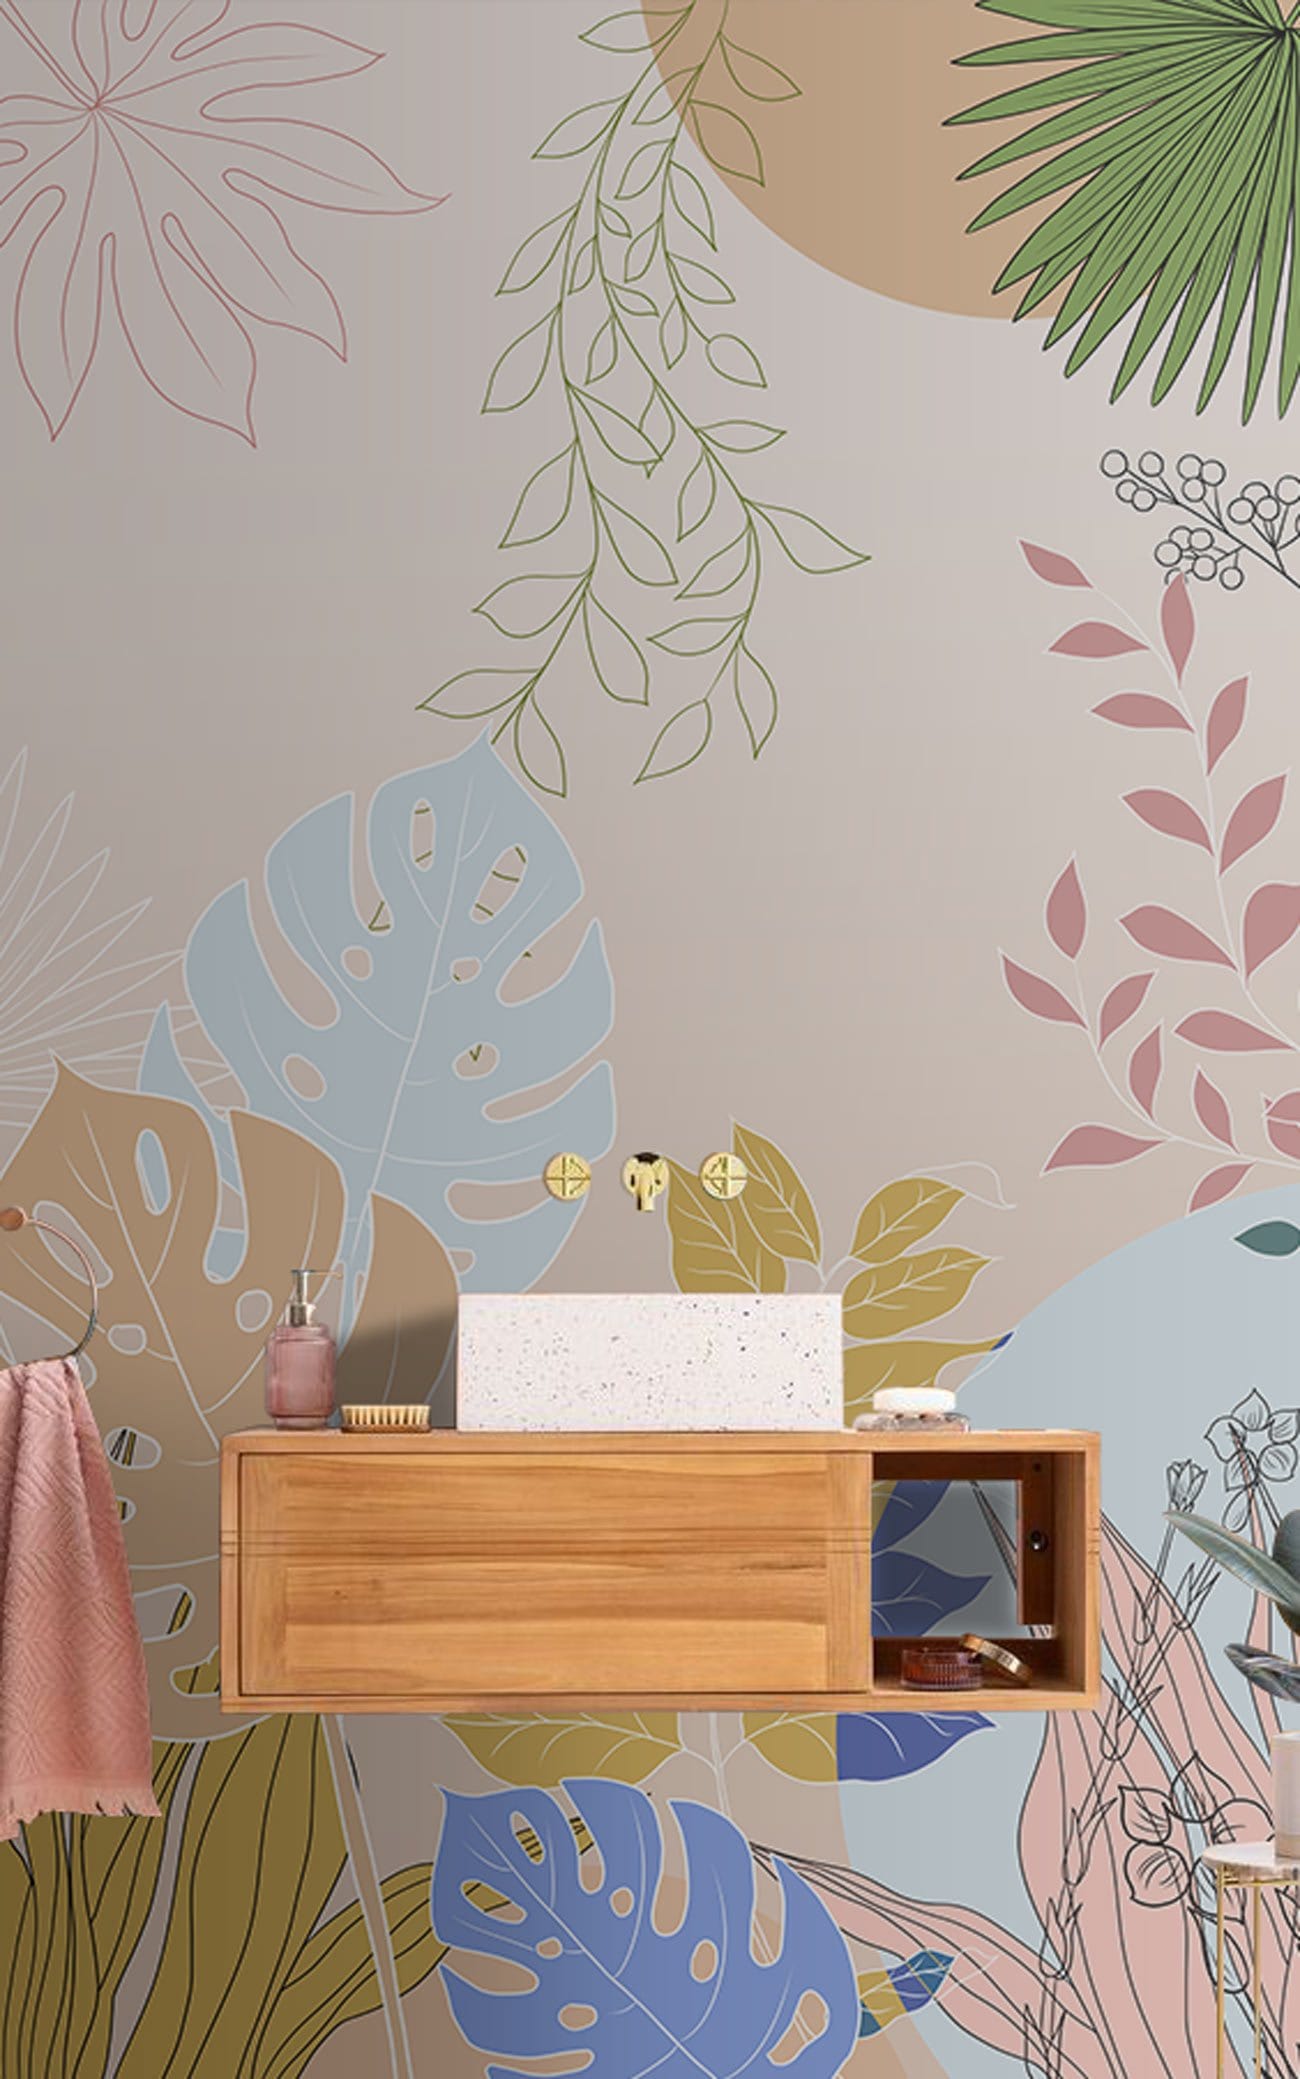 Vitality Plant Wallpaper Mural for Use as Decorating Material in Bathrooms